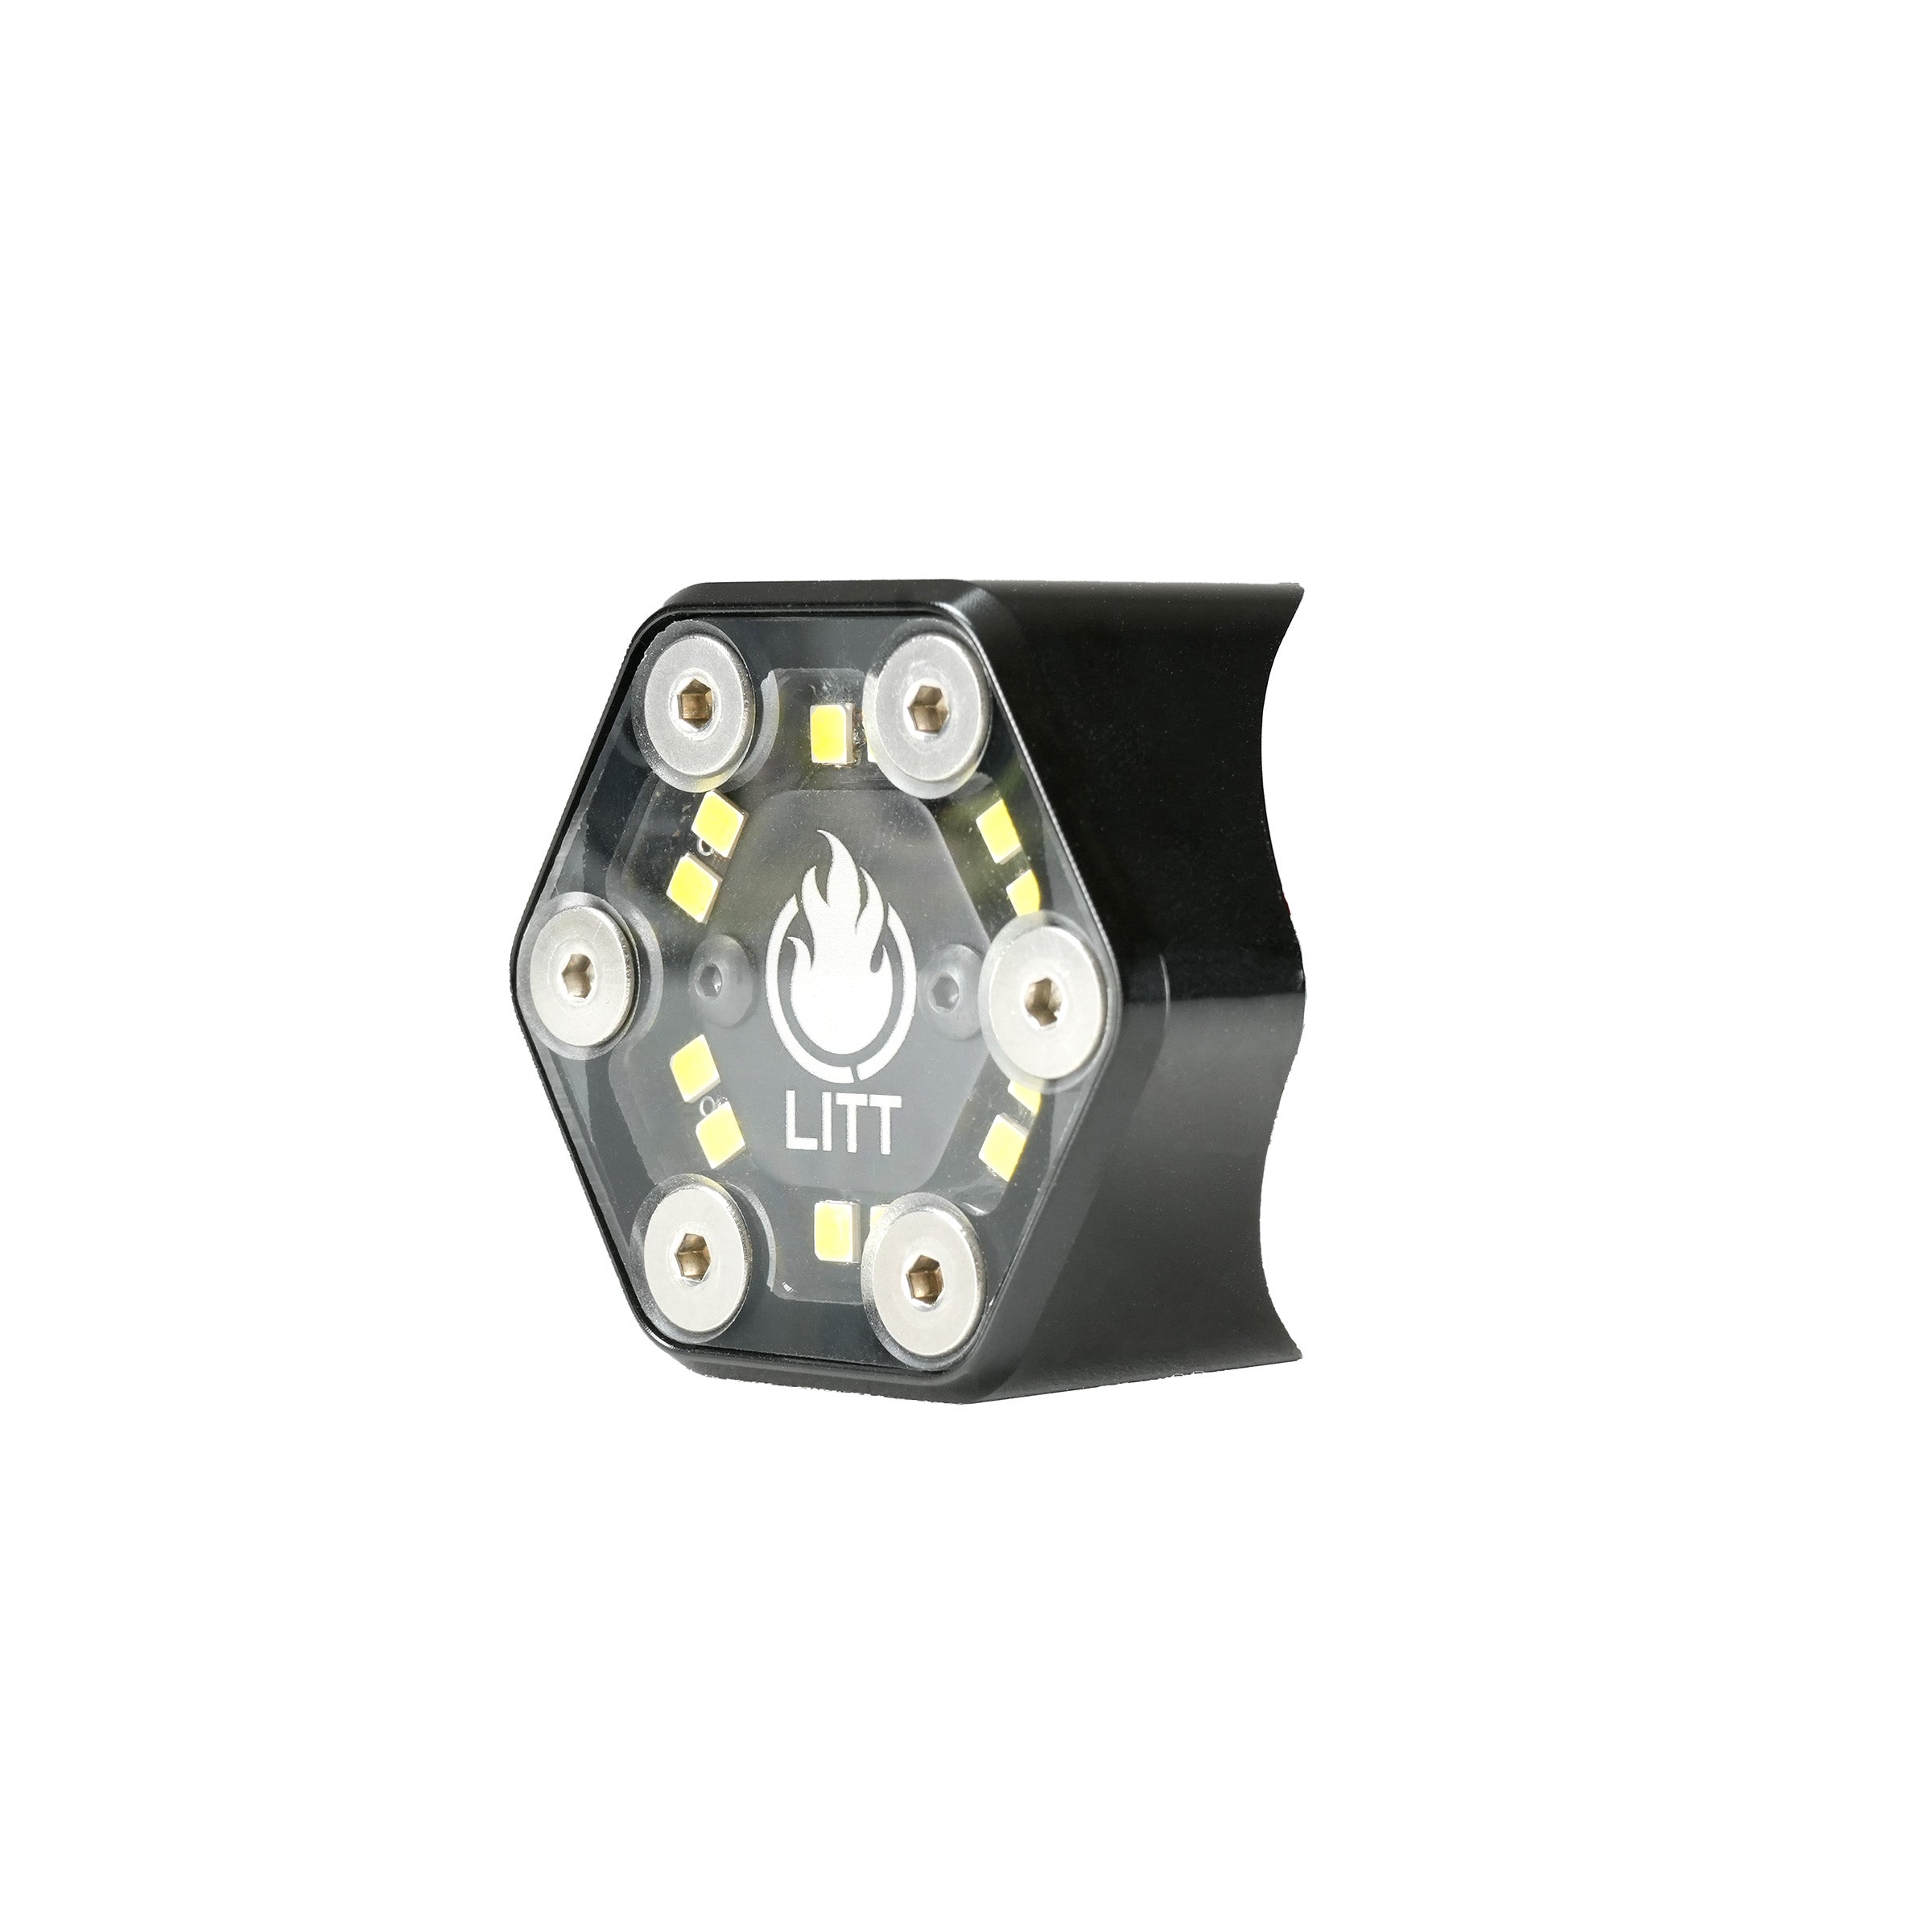 litt industries hex billet aluminum rock dome led light with over 600 lumens of output comes in 6 different colors and flat or 1.75" housings for easy mounting